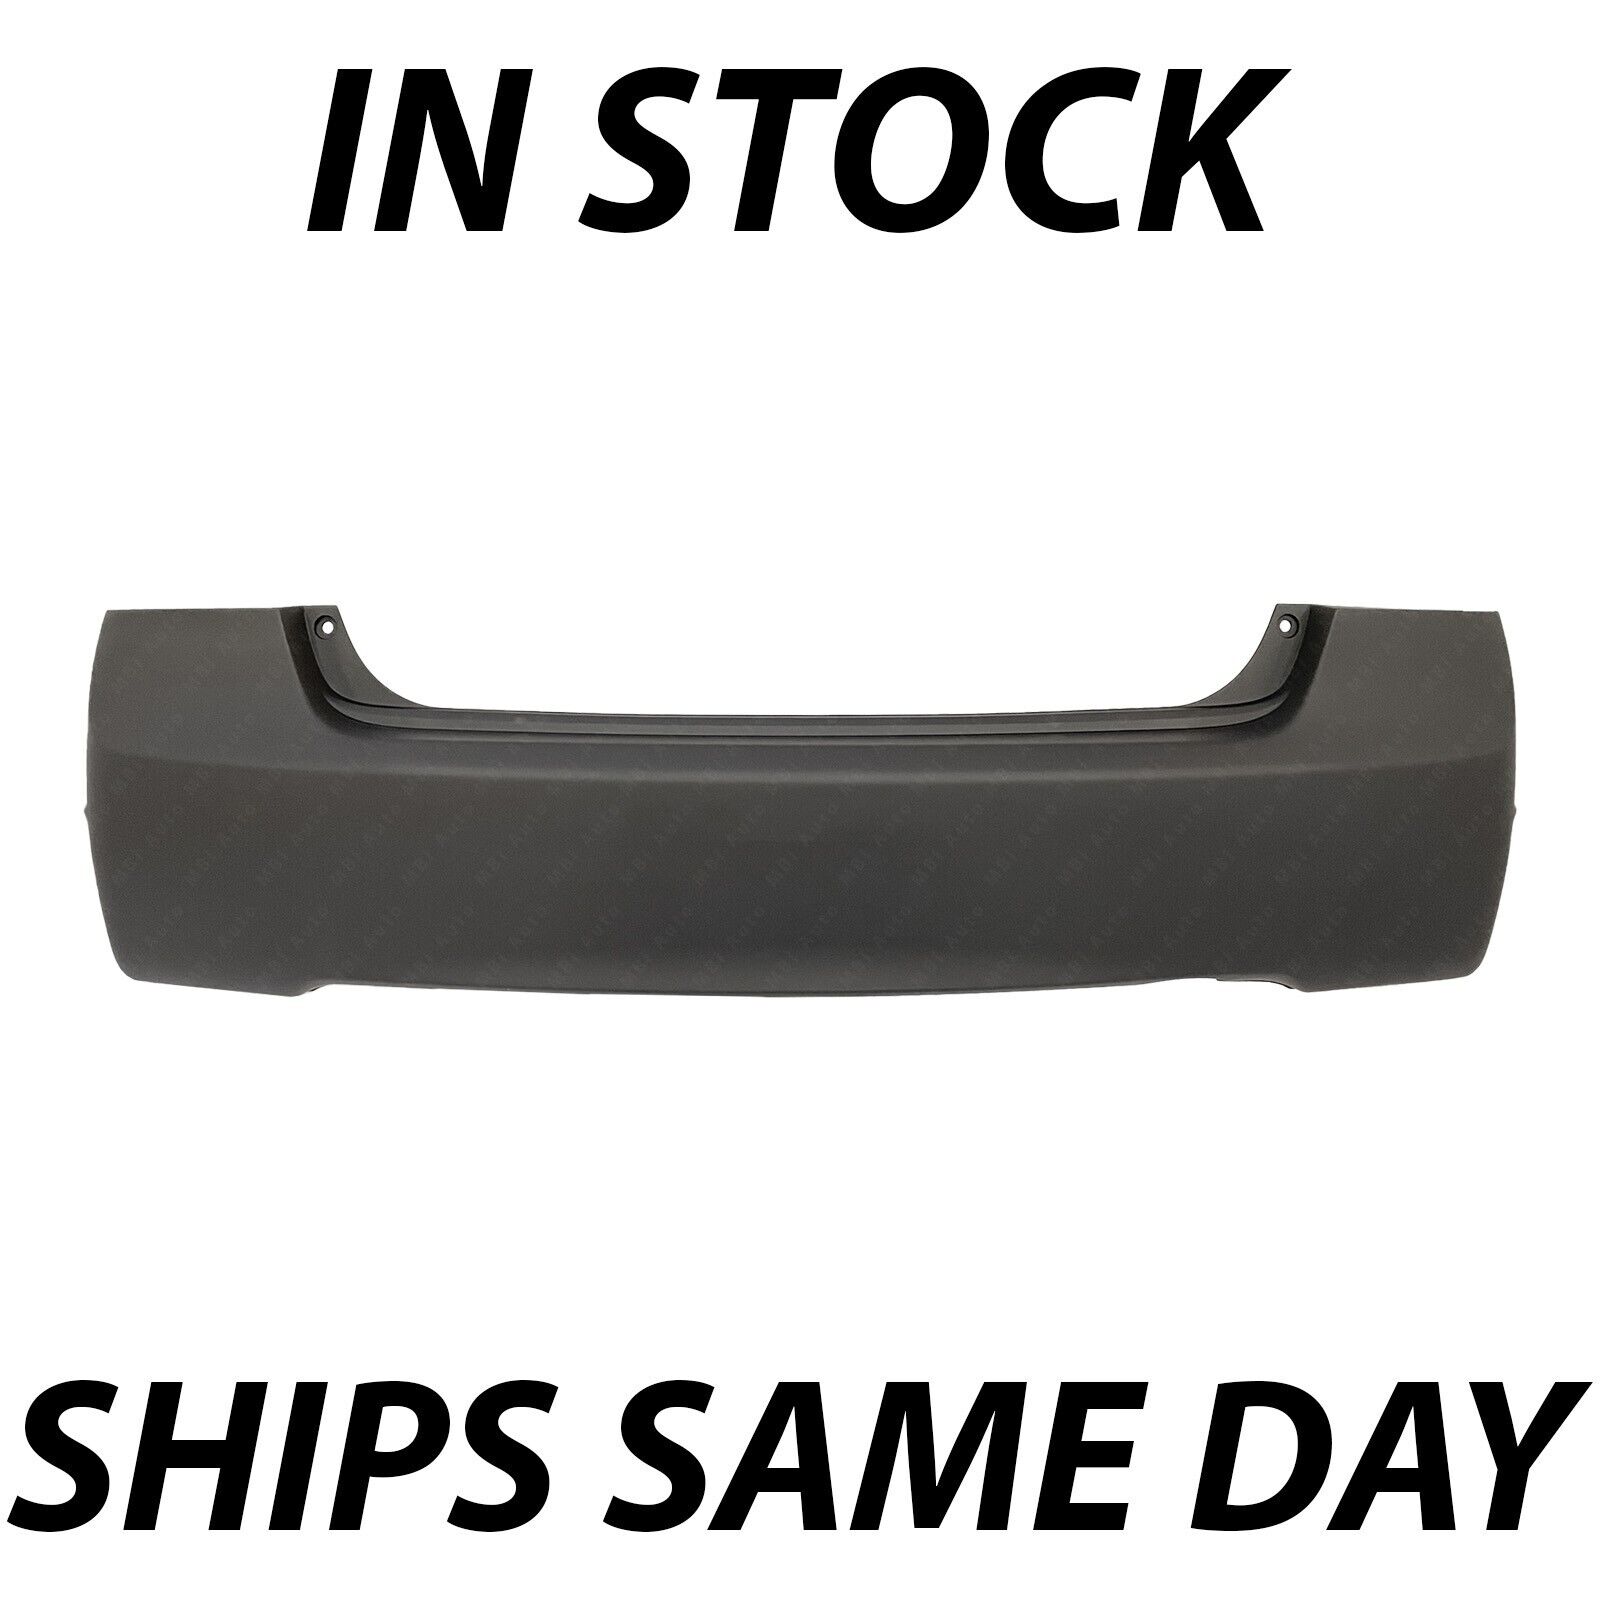 NEW Primered - Rear Bumper Cover Replacement for 2006-2011 Honda Civic Sedan 4dr